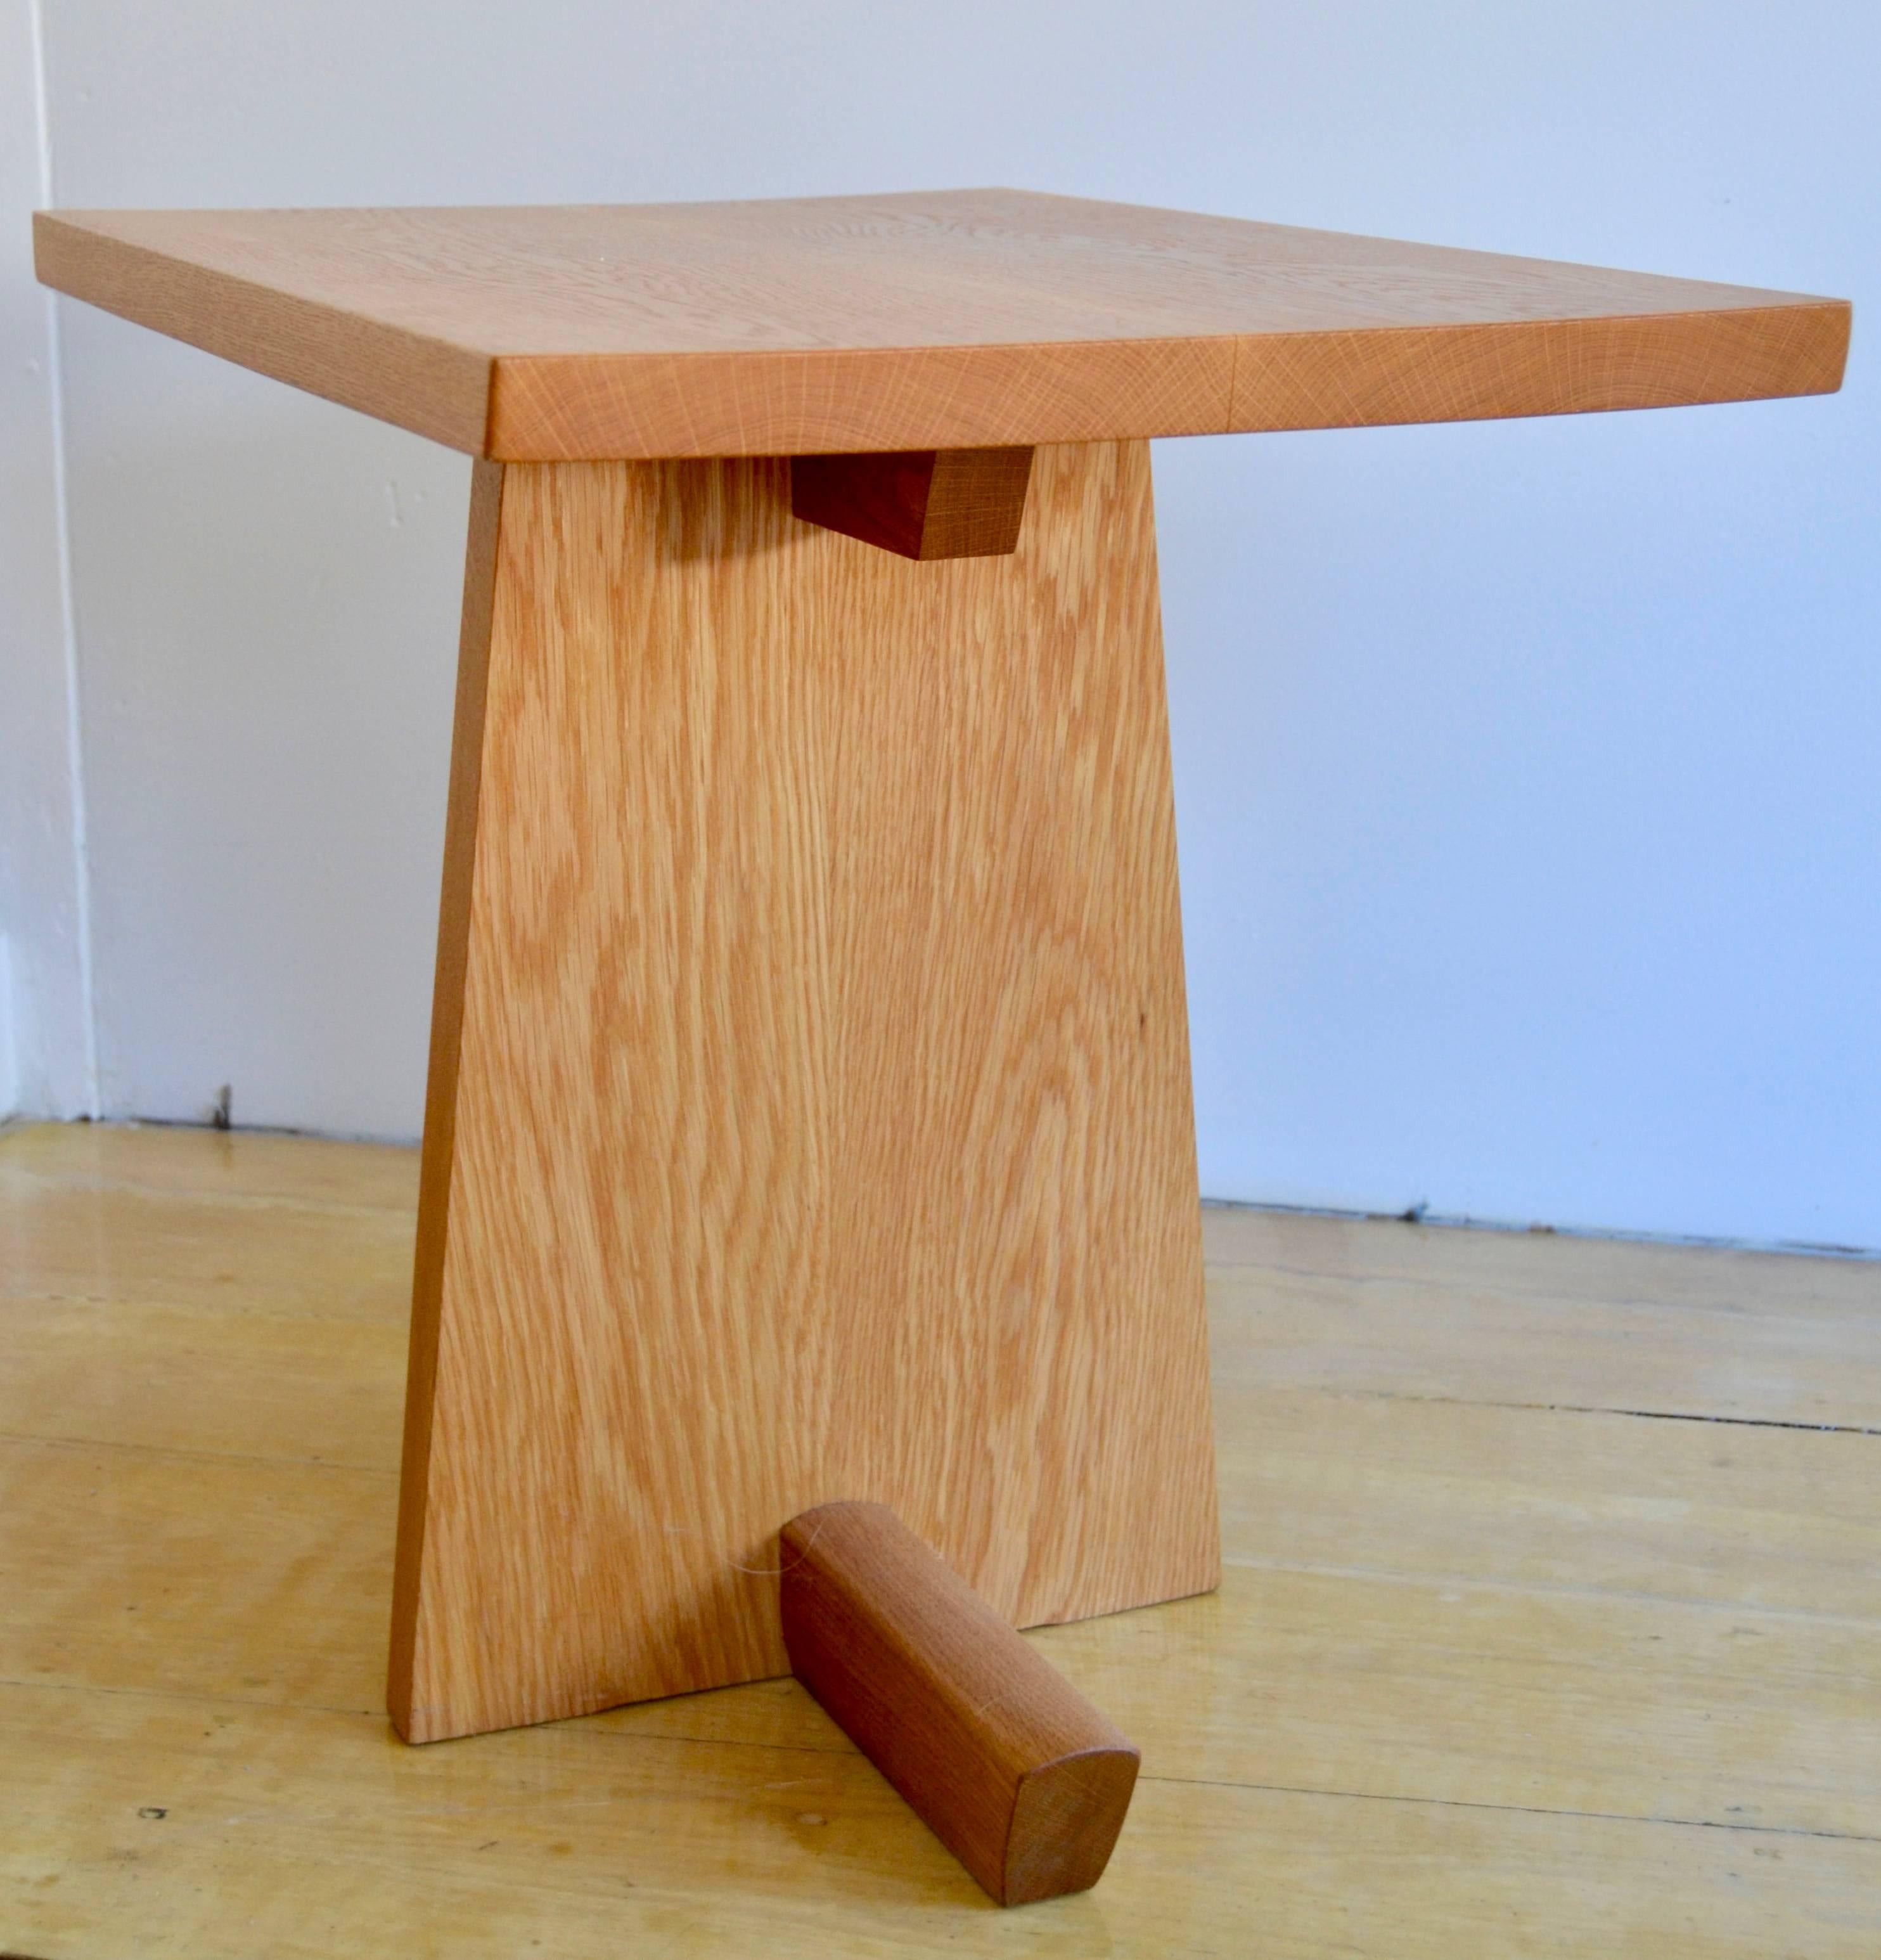 Greenrock side table by Mira Nakashima in white oak.
Signed and dated October, 1996 on the underside.
The table is in excellent original condition. 